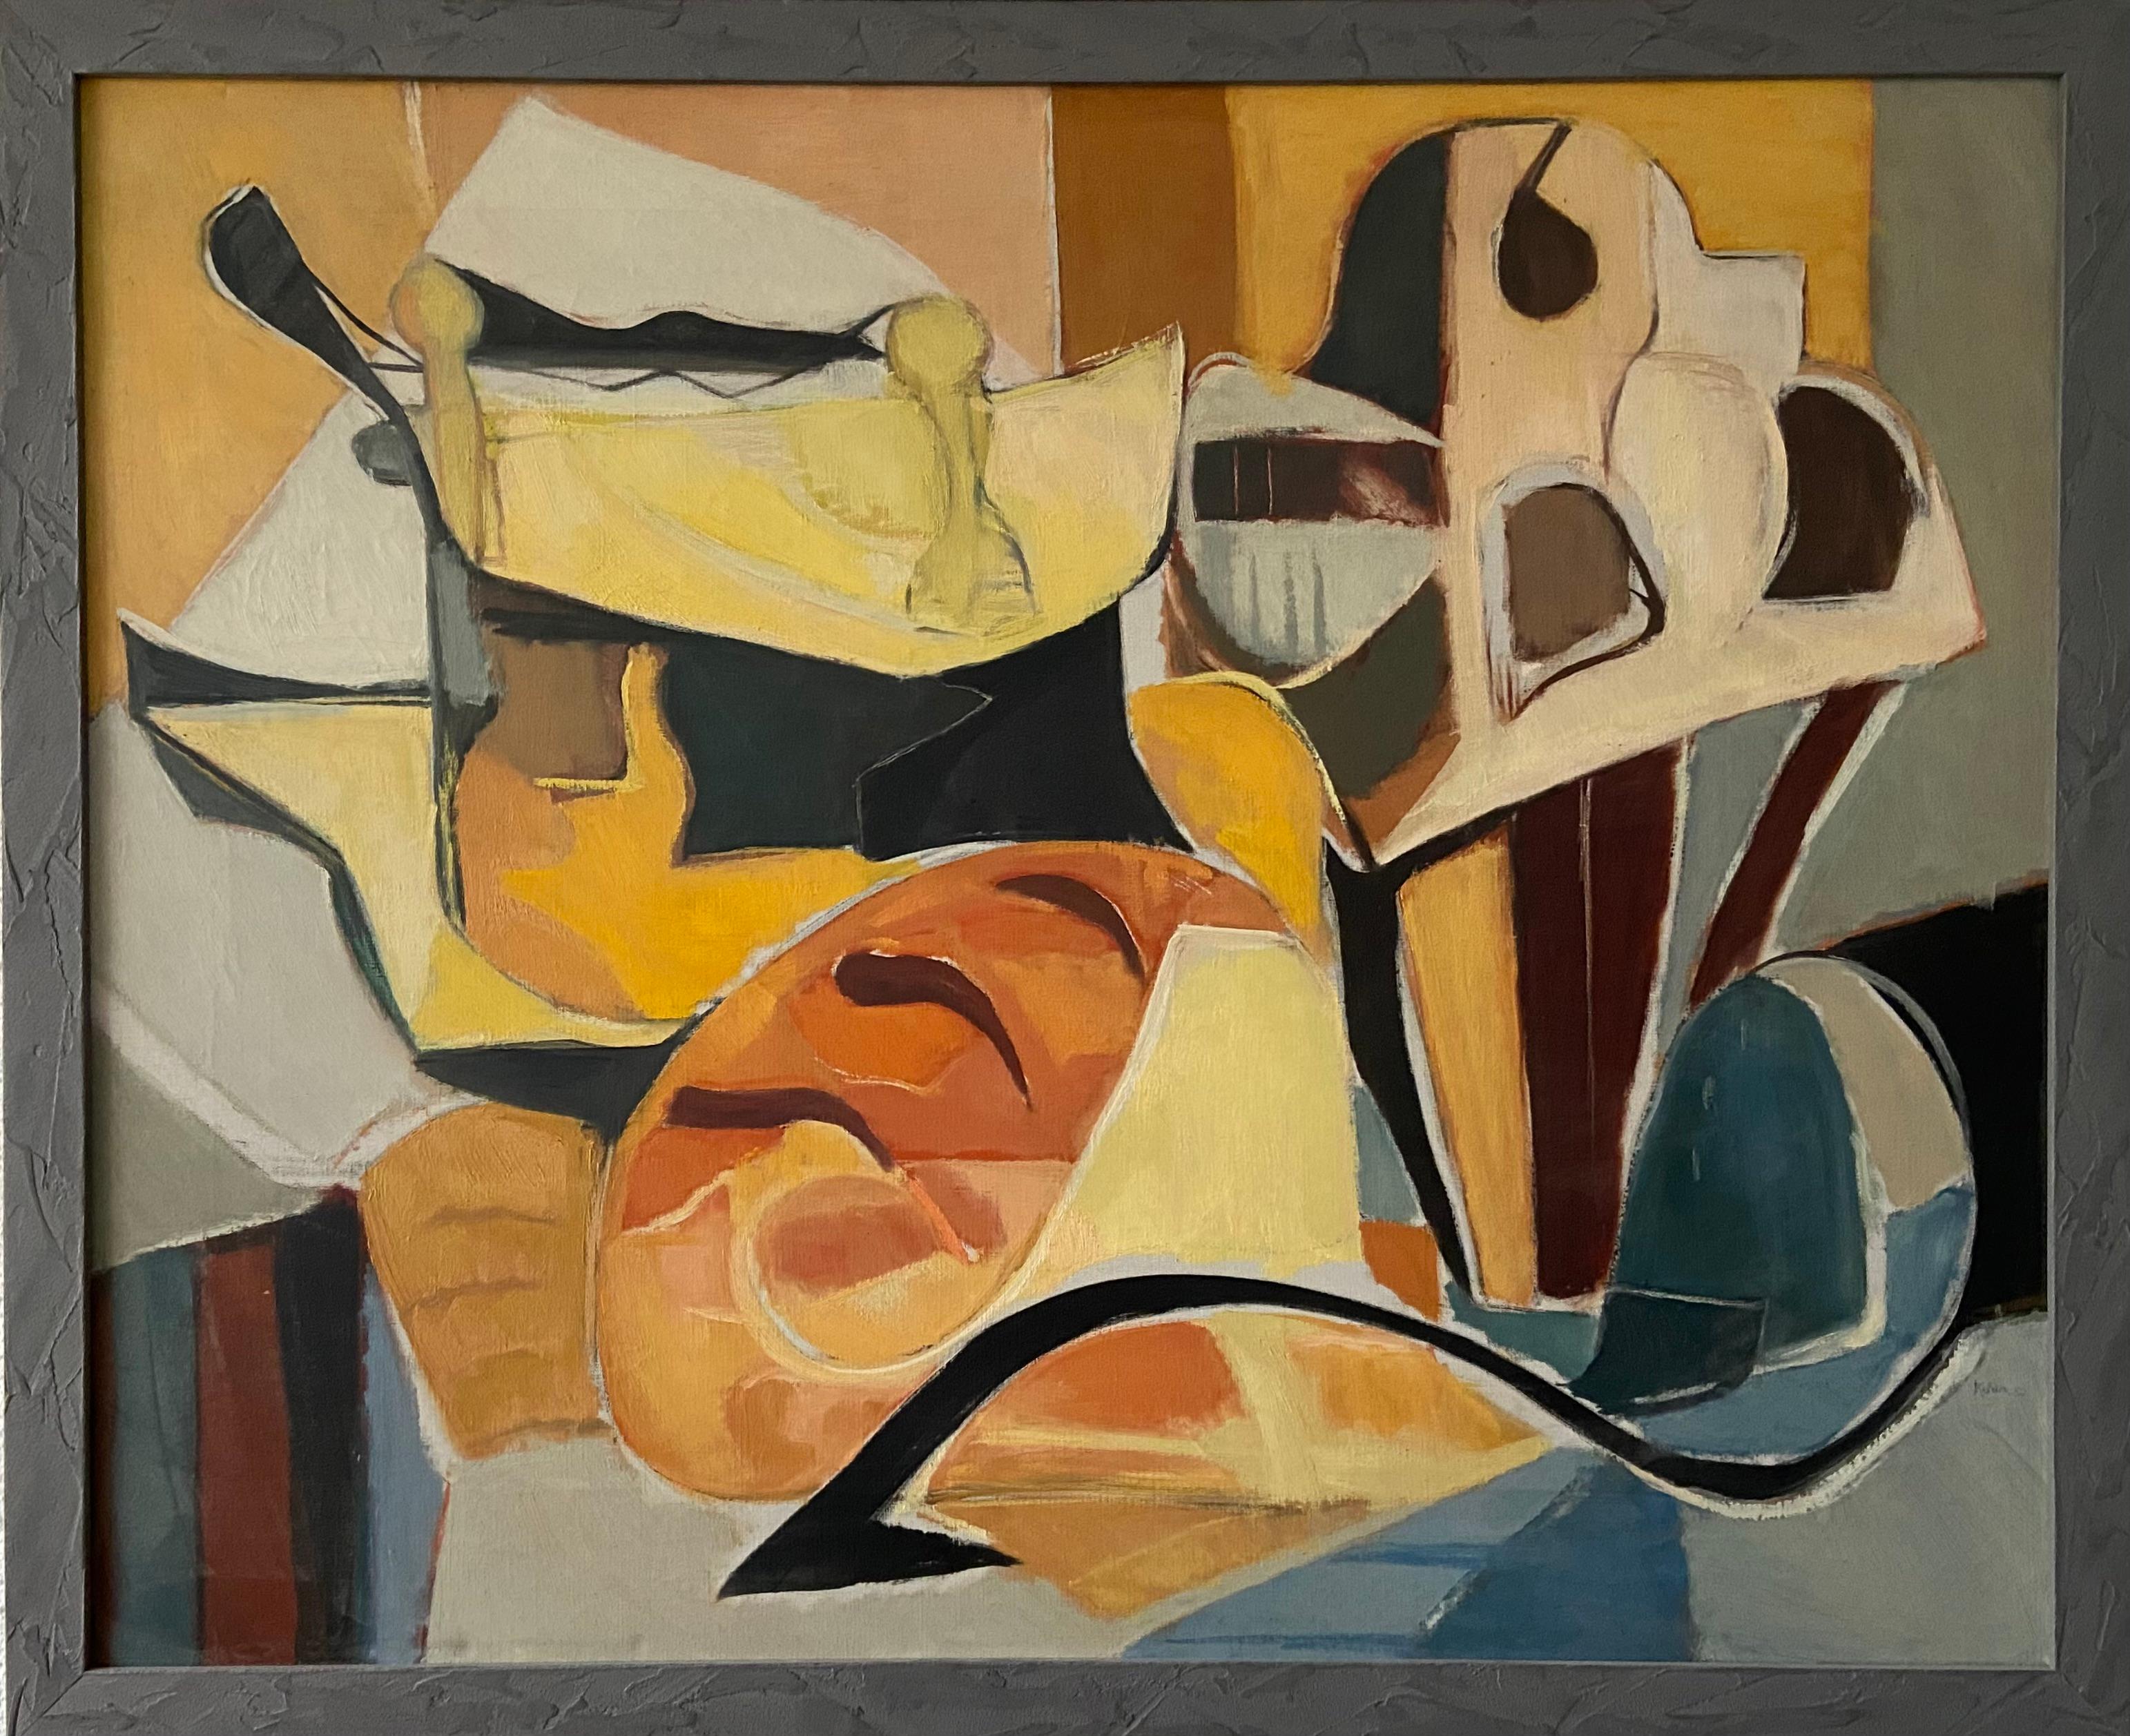 Abstract still life by Toon Kelder (Rotterdam 1894 - Den Haag 1973).
Signed and dated 1950.